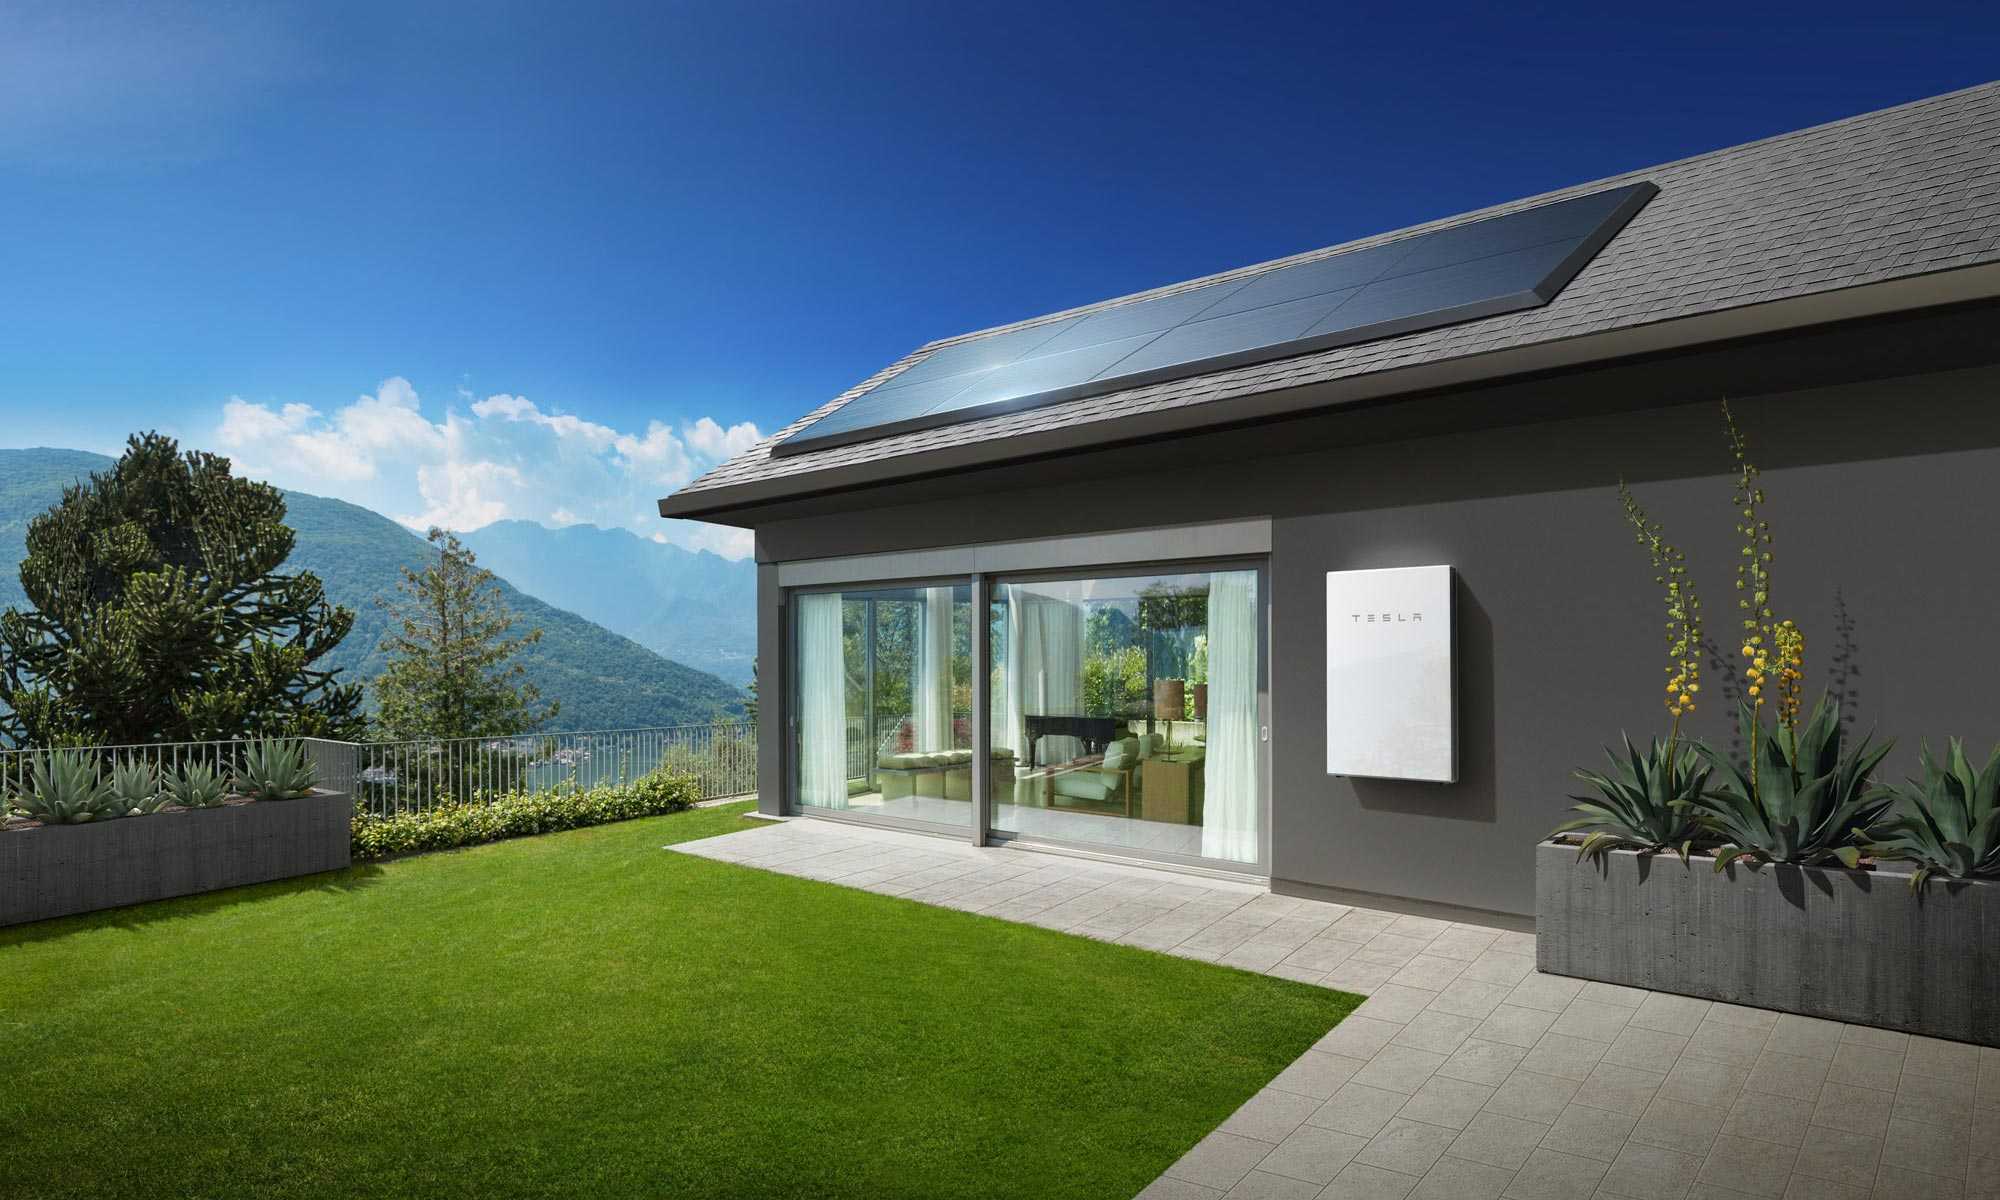 New and existing solar panel owners: Now is the time to insure your panels with a home battery!